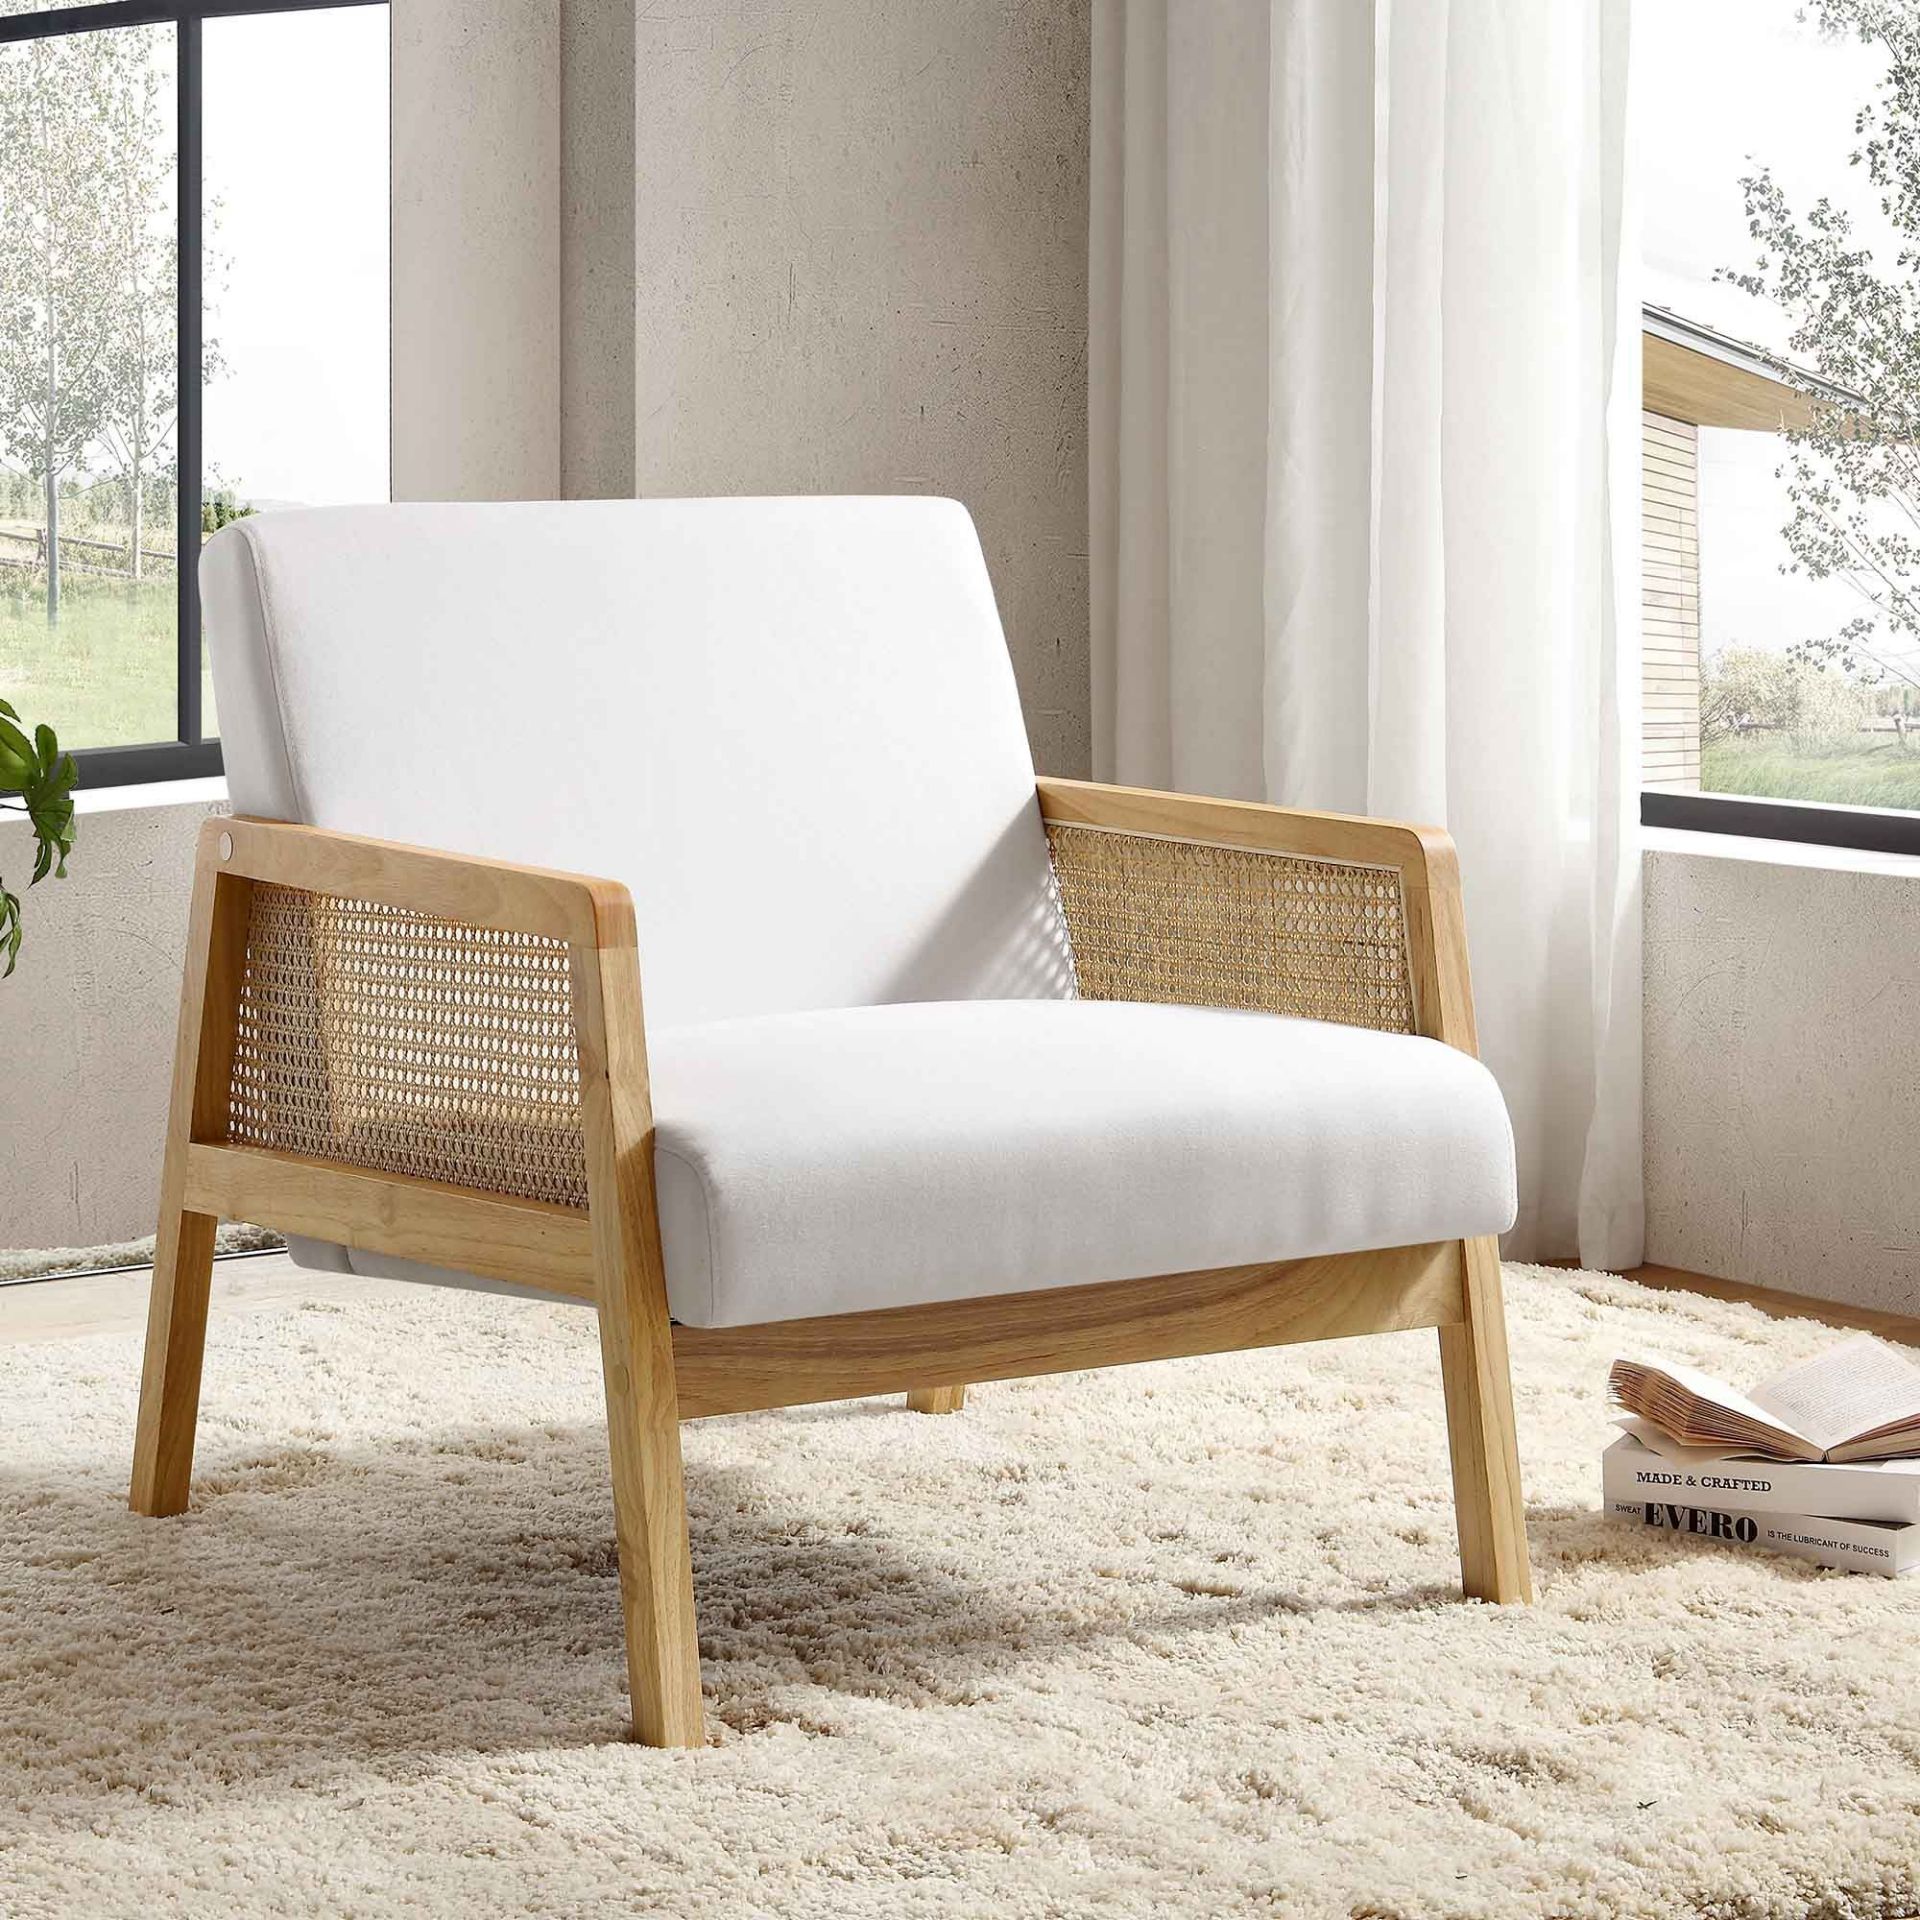 Fyne Beige Fabric Natural Frame Rattan Armchair. - BI. RRP £229.99. Crafted from solid wood, the